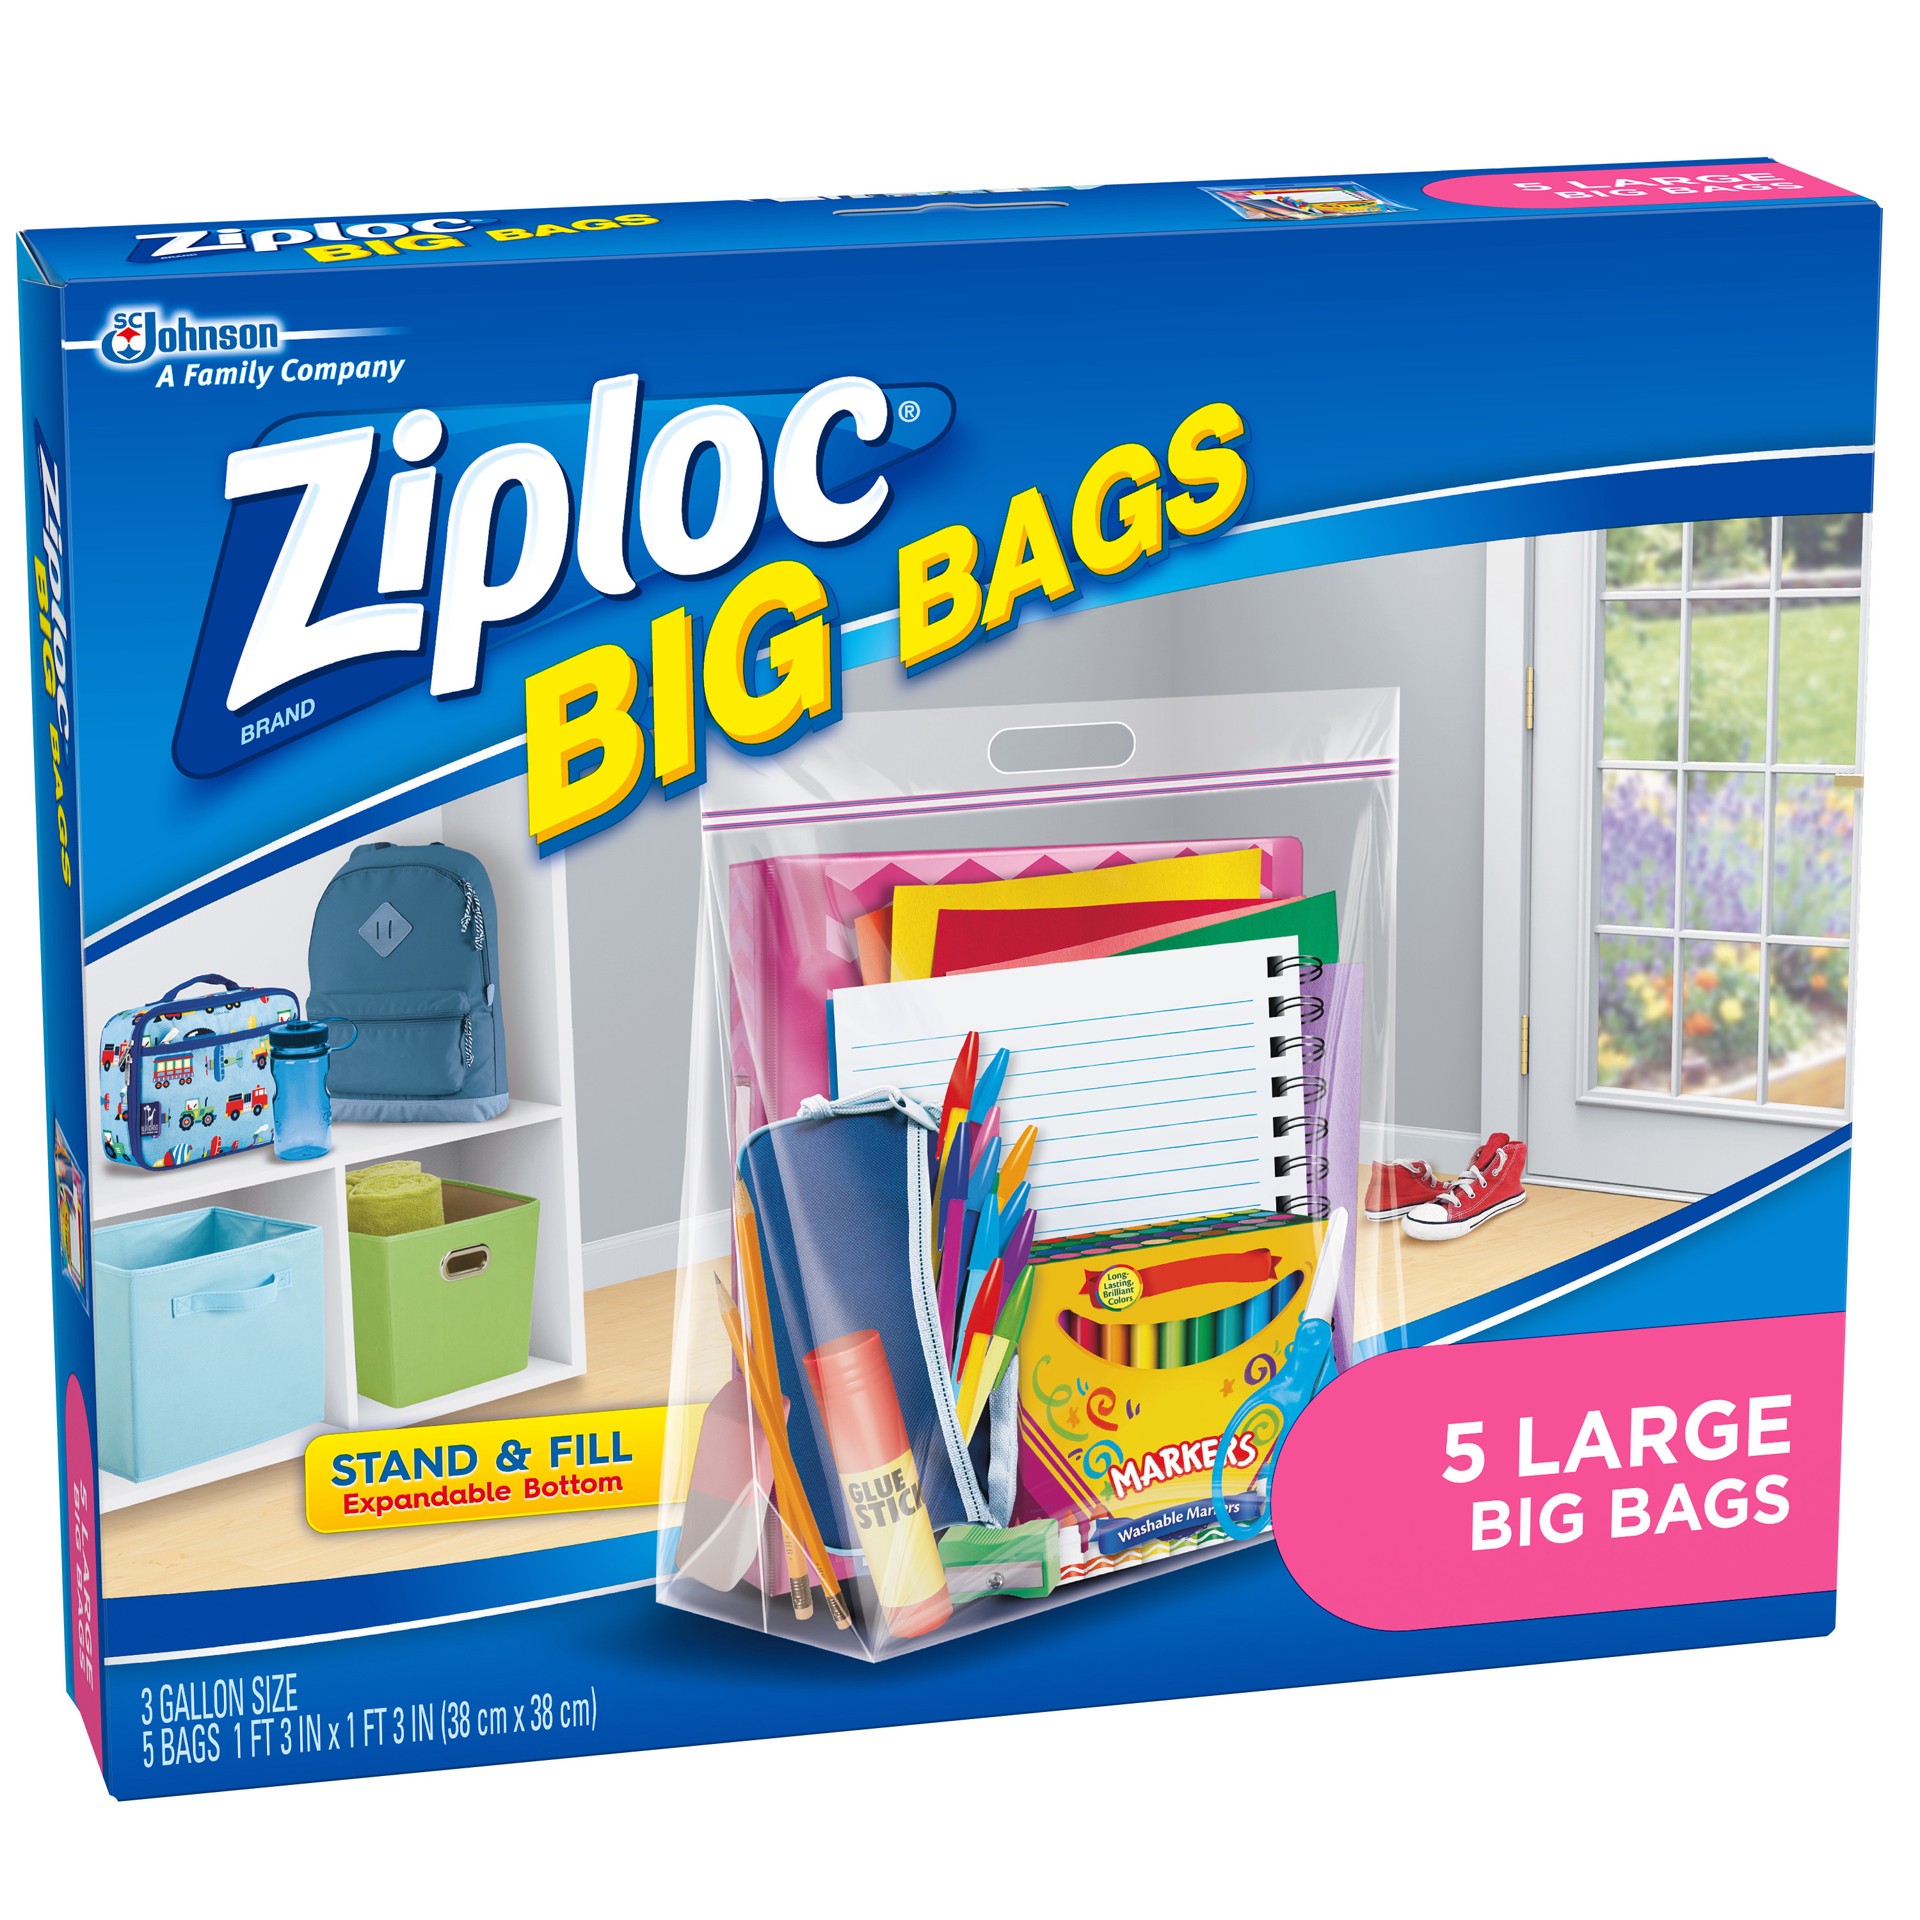 slide 4 of 5, Ziploc Big Bags, Large, Secure Double Zipper, 5 CT,  Expandable Bottom, Heavy-Duty Plastic, Built-In Handles, Flexible Shape to Fit Where Storage Boxes Can't, 5 ct